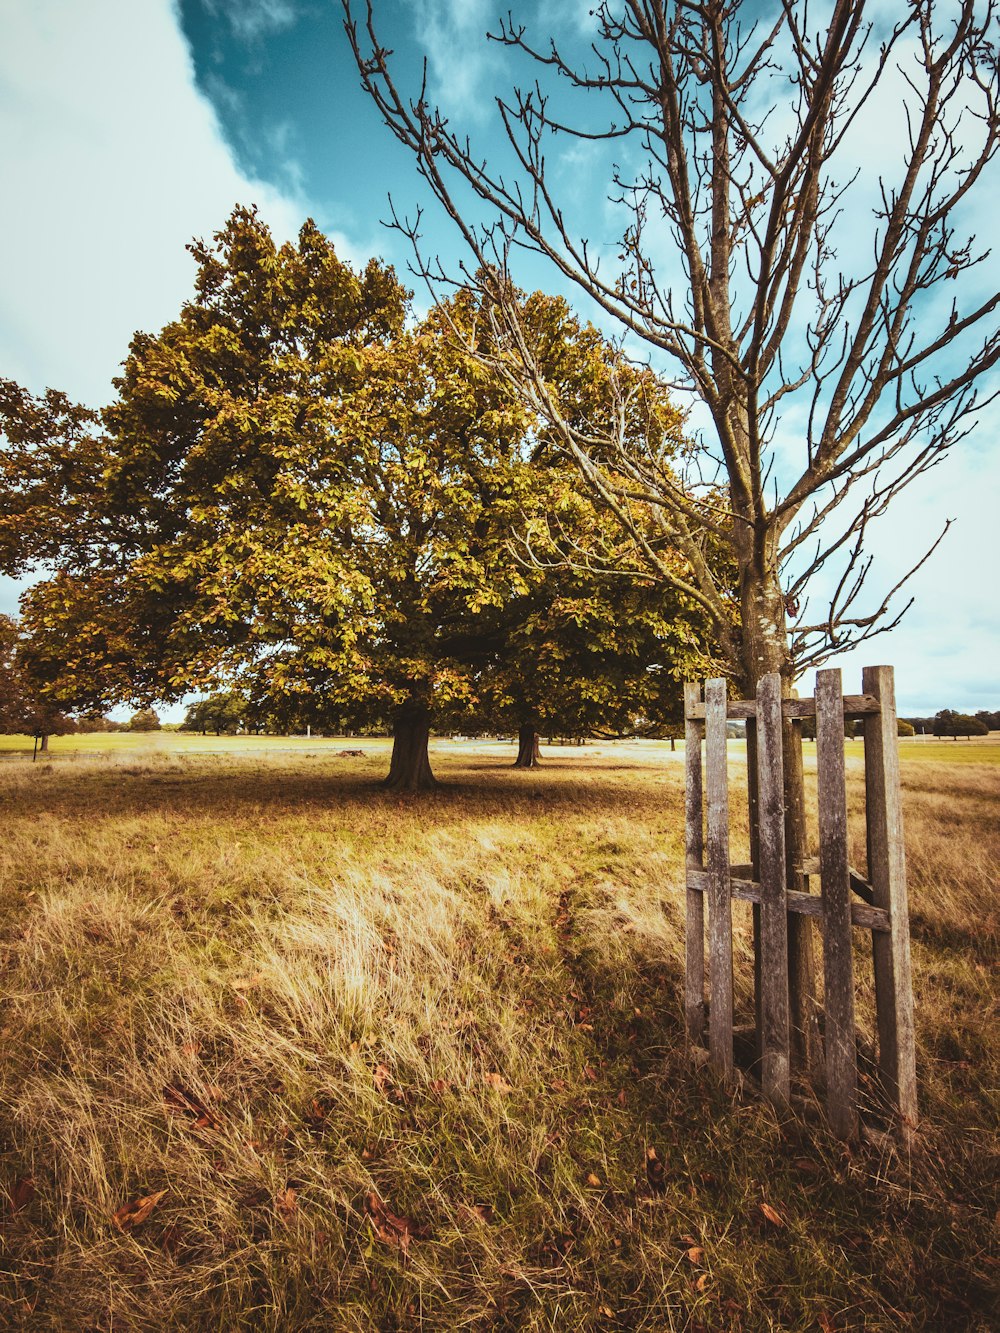 a tree in a field with a fence in the foreground